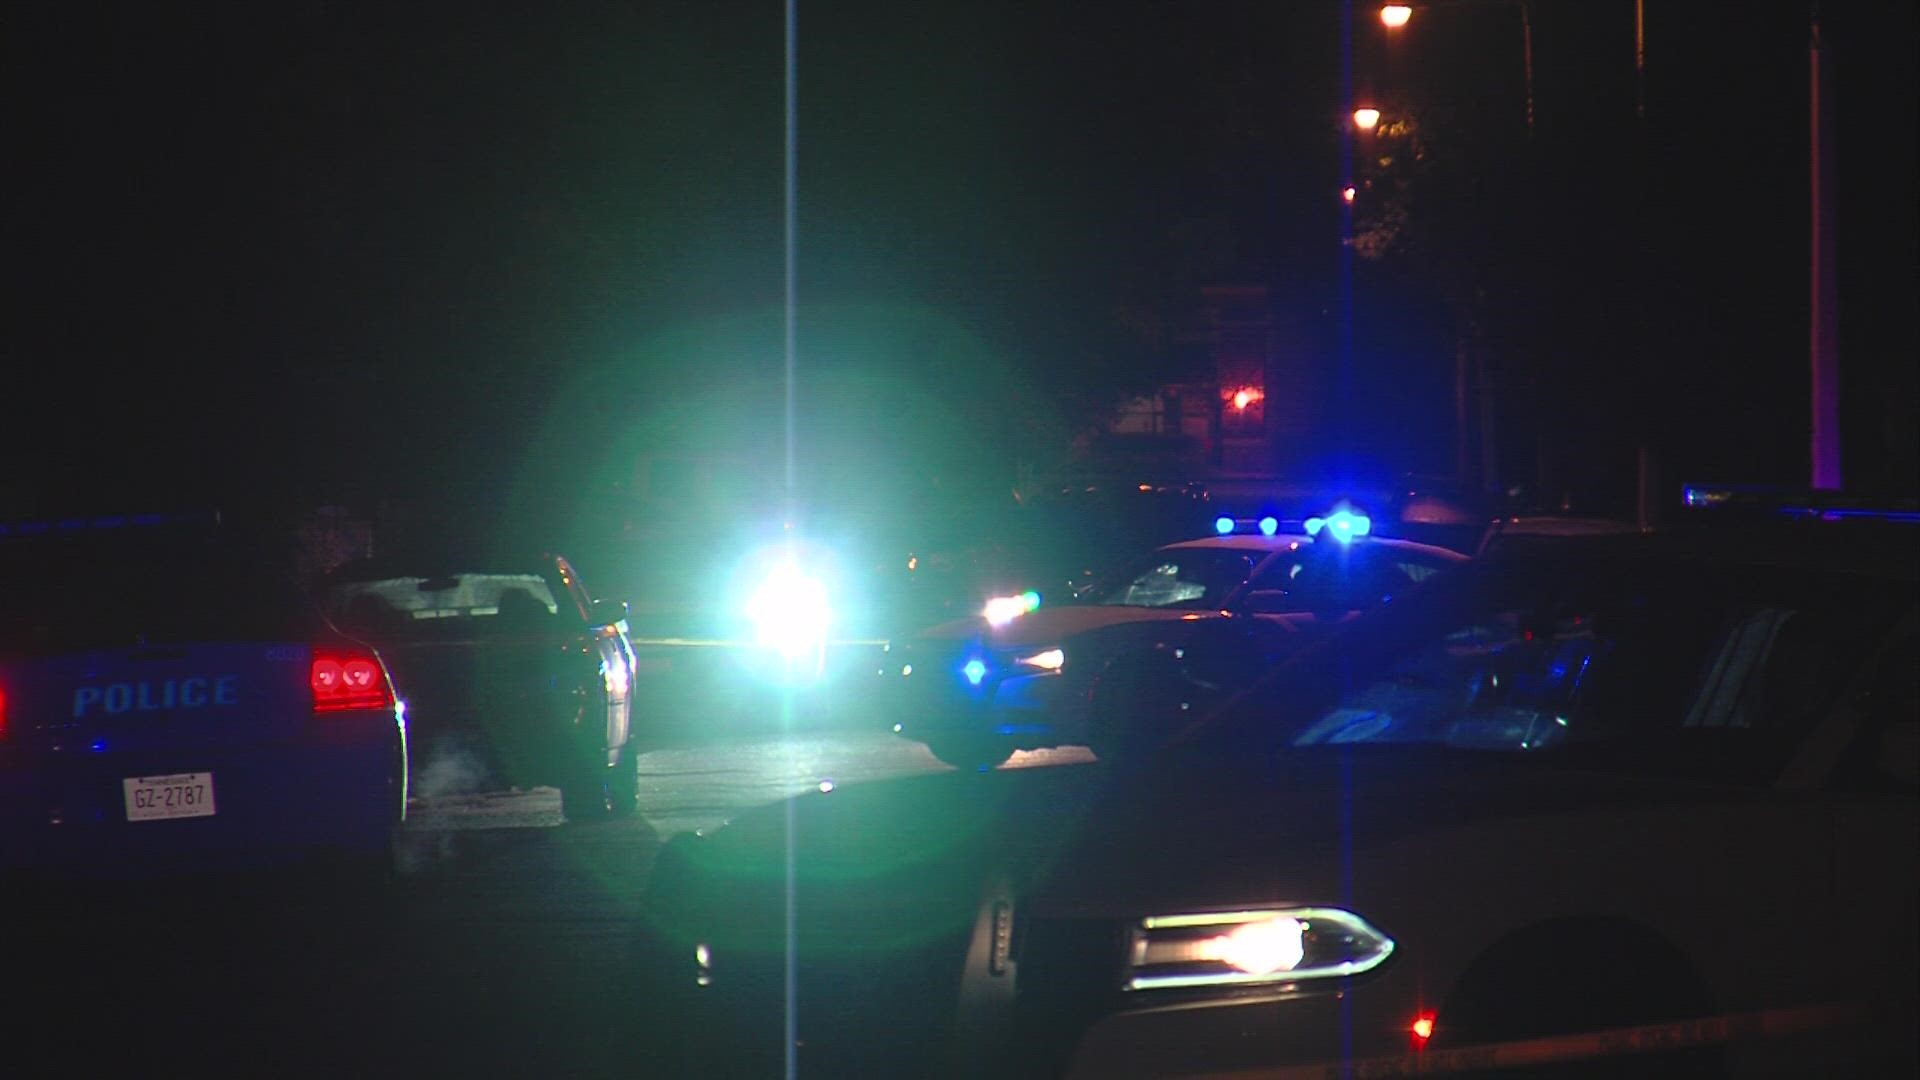 MPD said one person was killed and two others were injured after an overnight shooting.